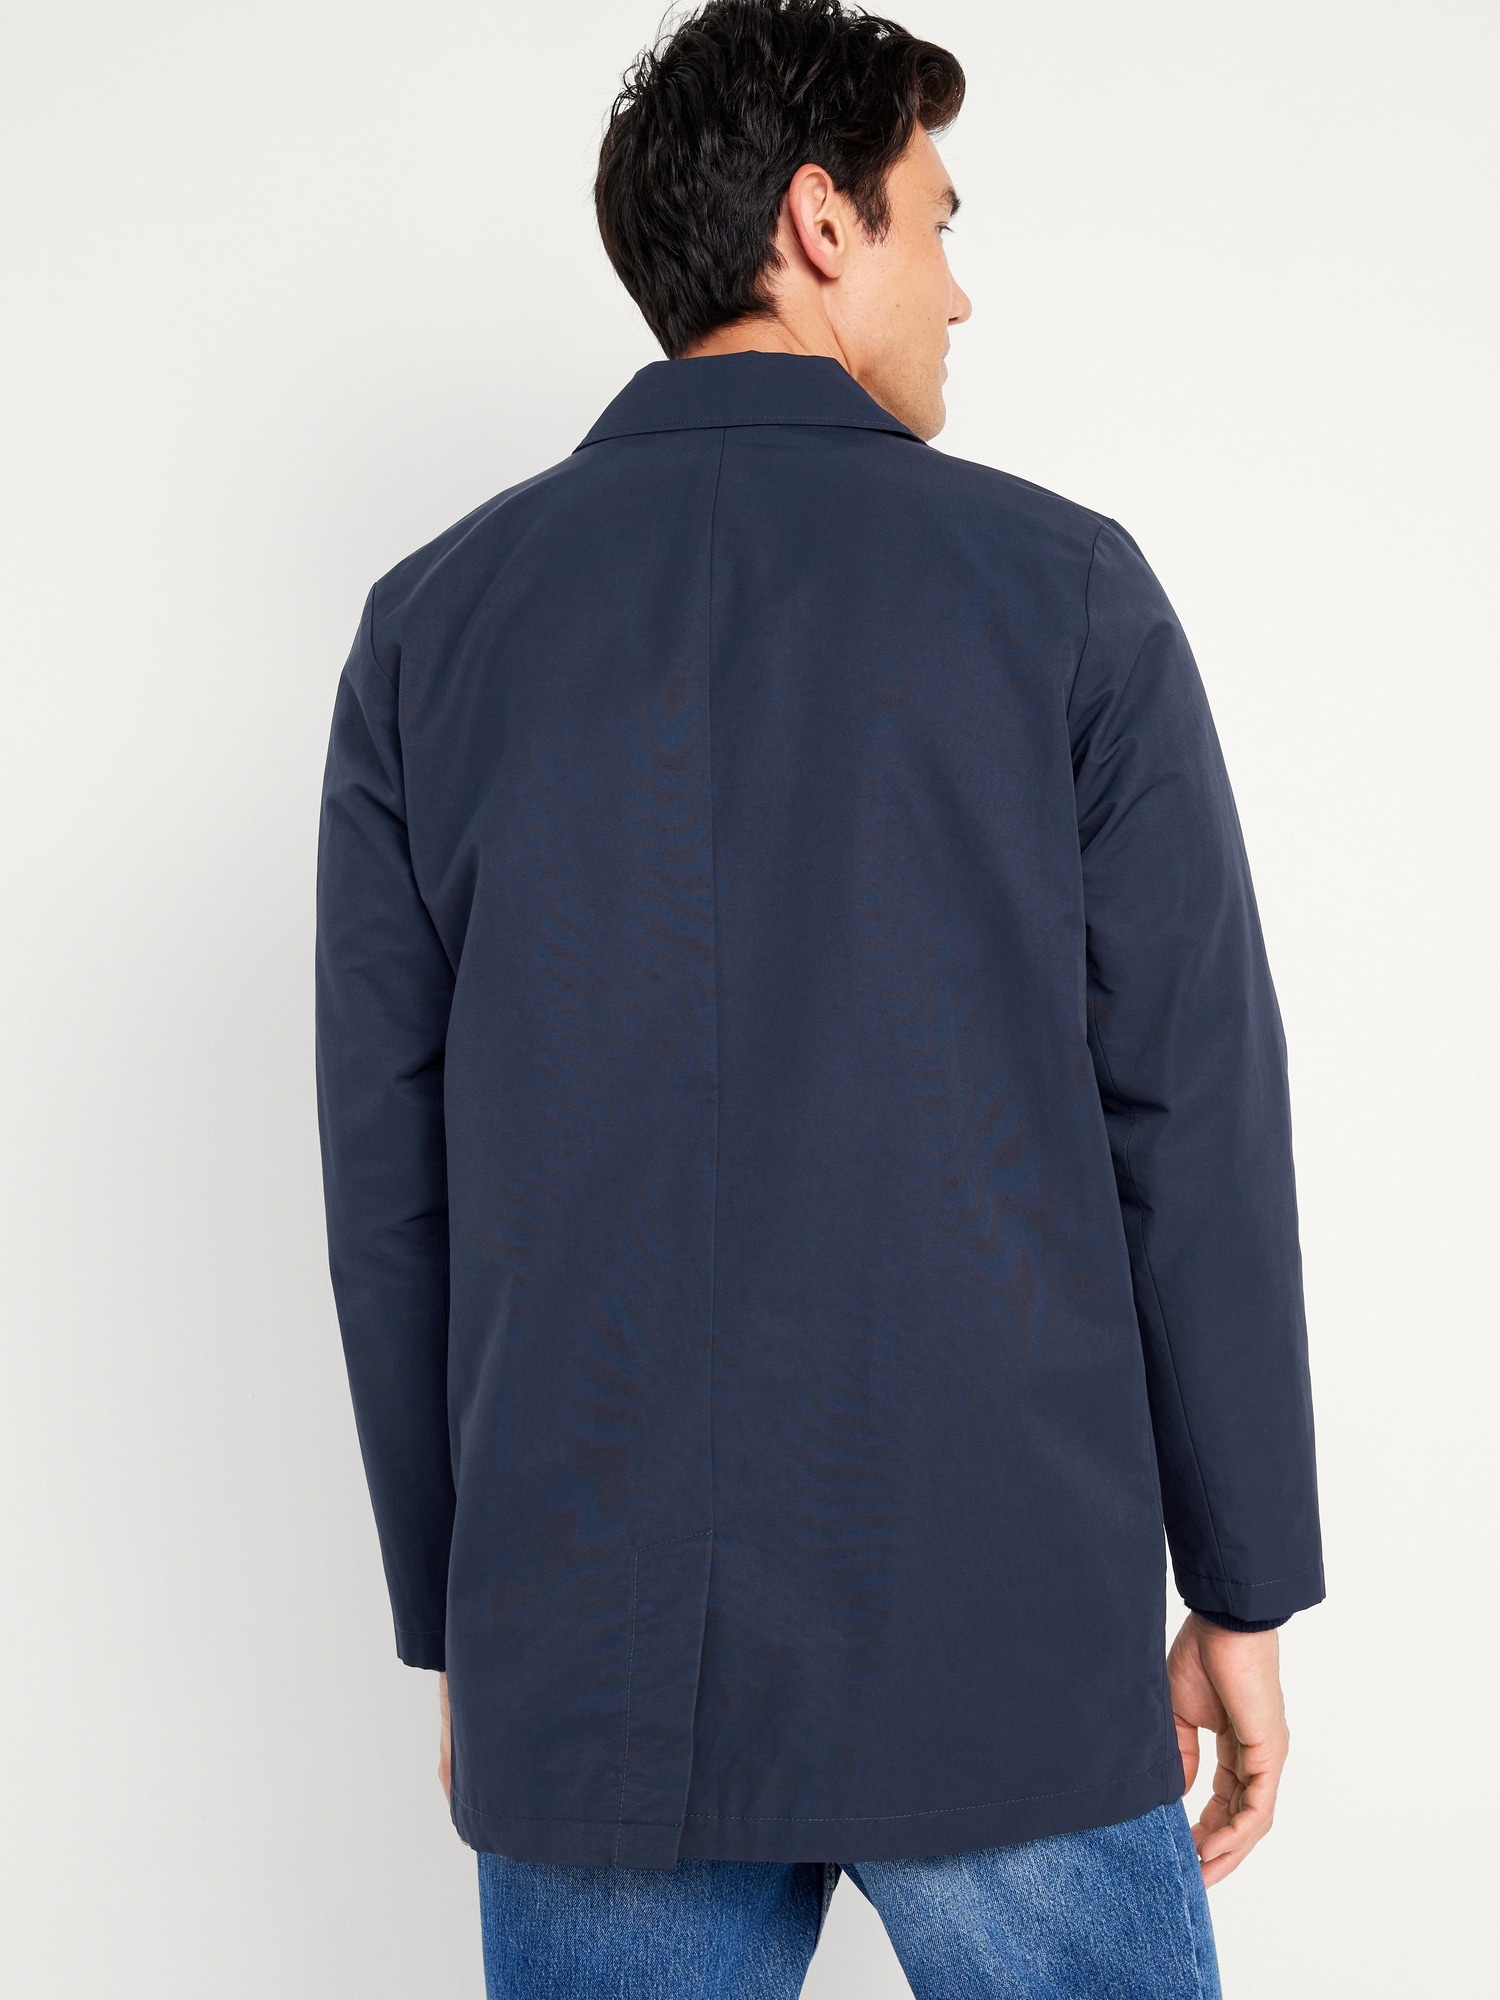 Button-Front Topcoat for Men | Old Navy